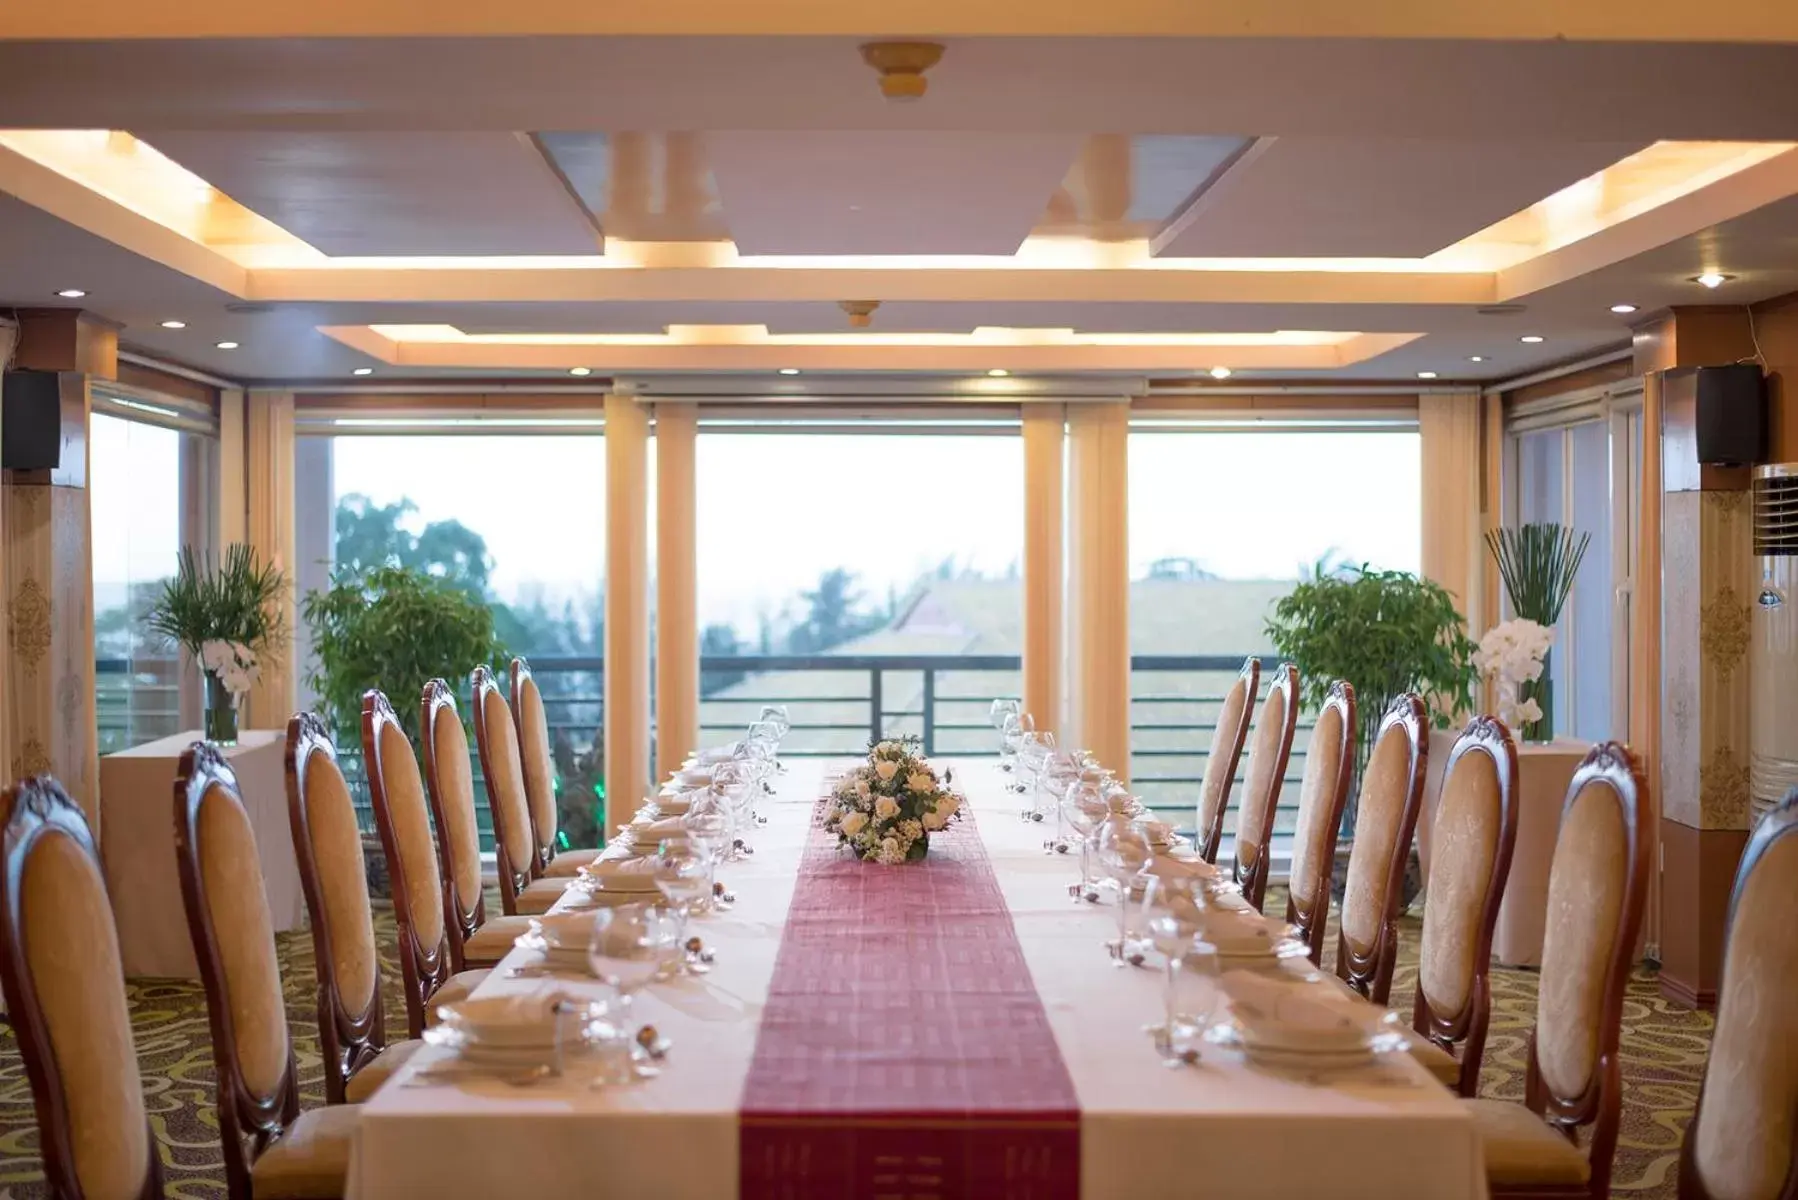 Business facilities, Banquet Facilities in Palace Hotel